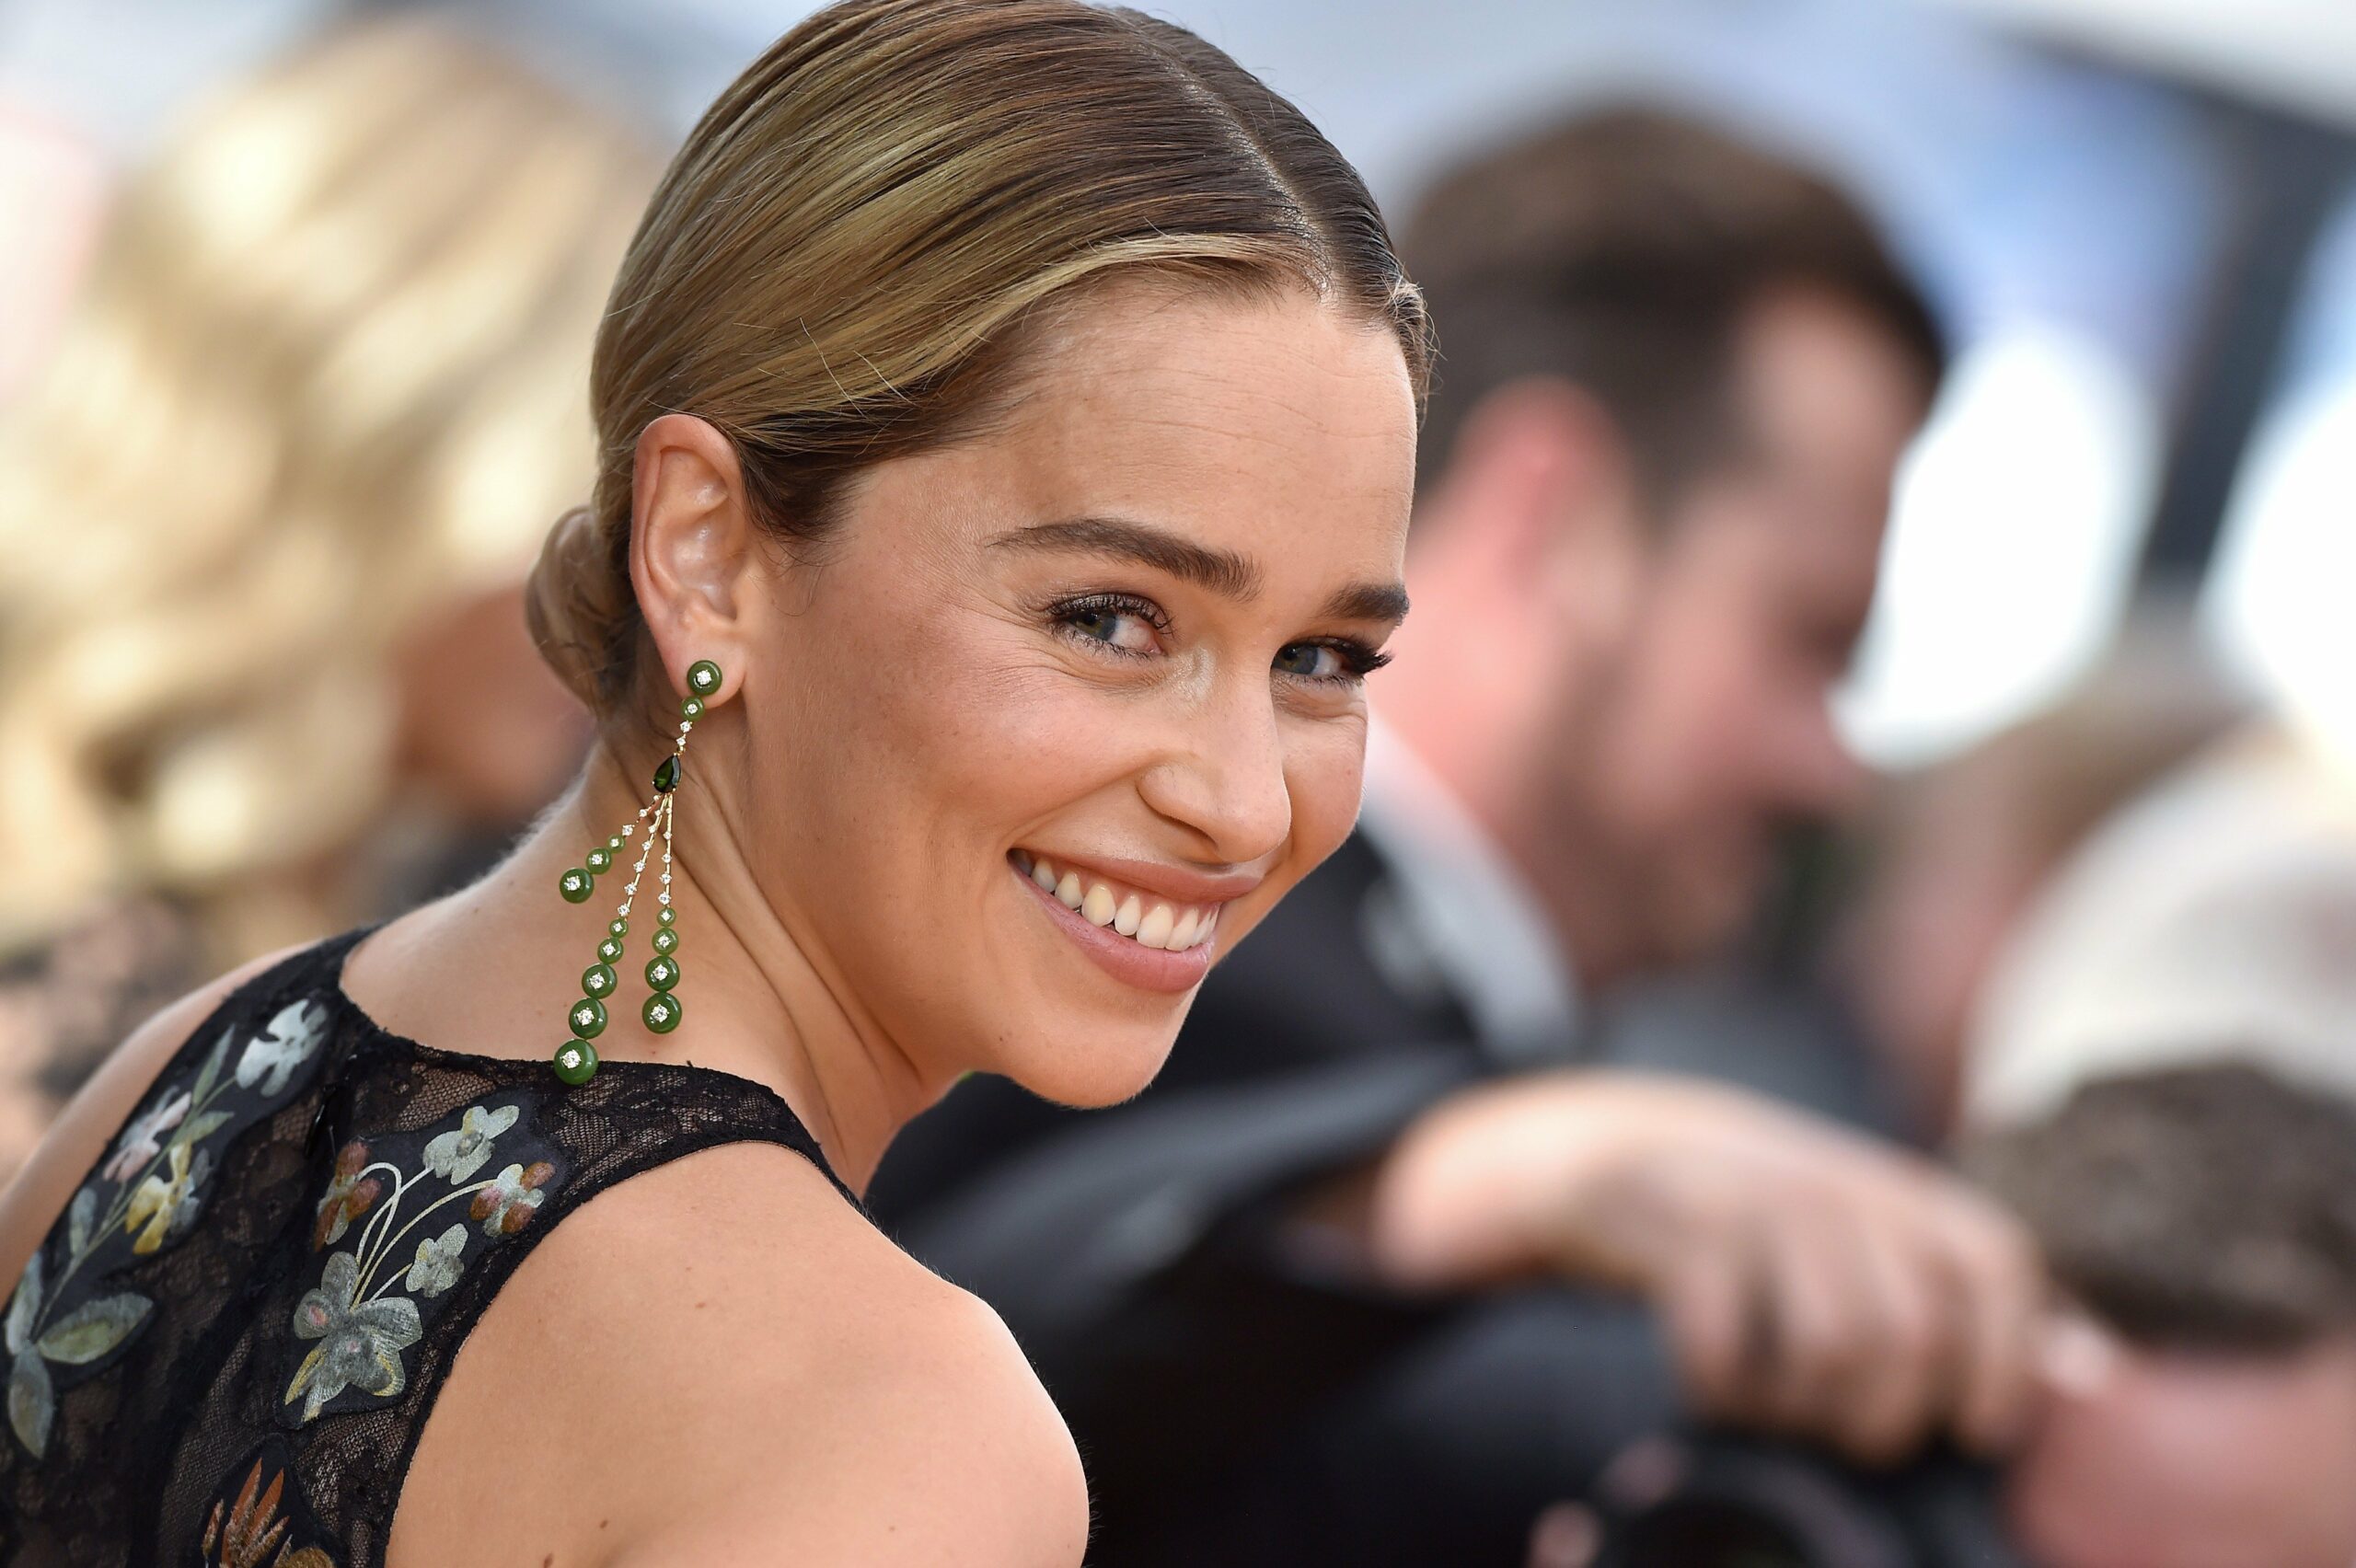 Does Emilia Clarke have a baby?